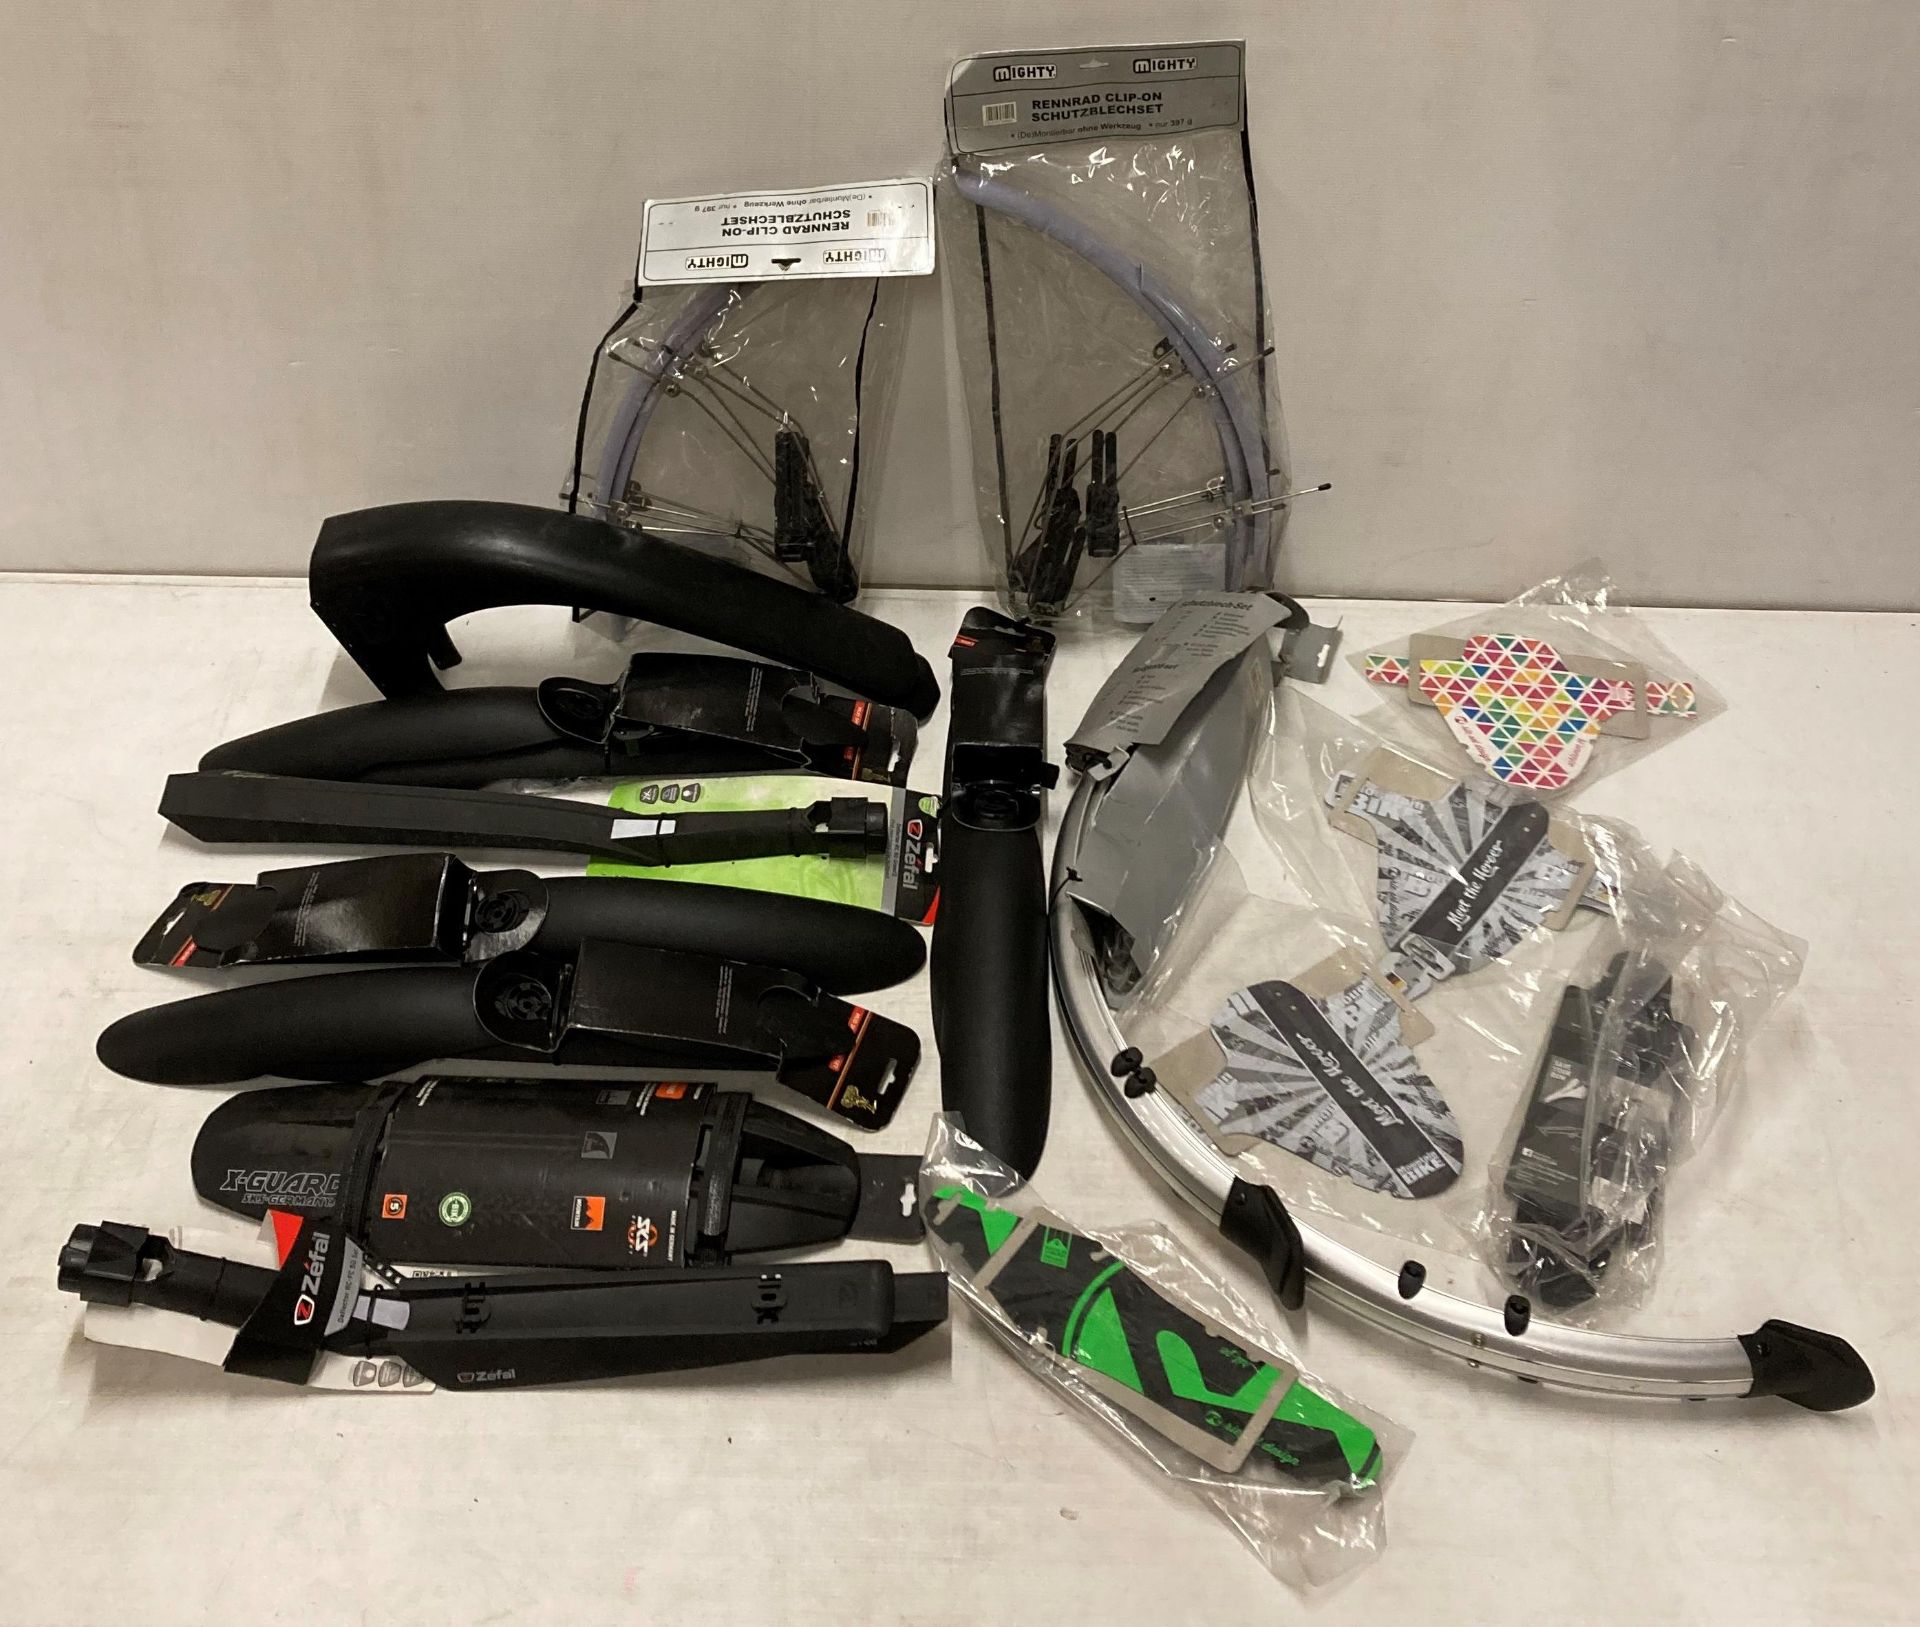 18 x assorted clip-on mud guards (various colours) (saleroom location: M05)